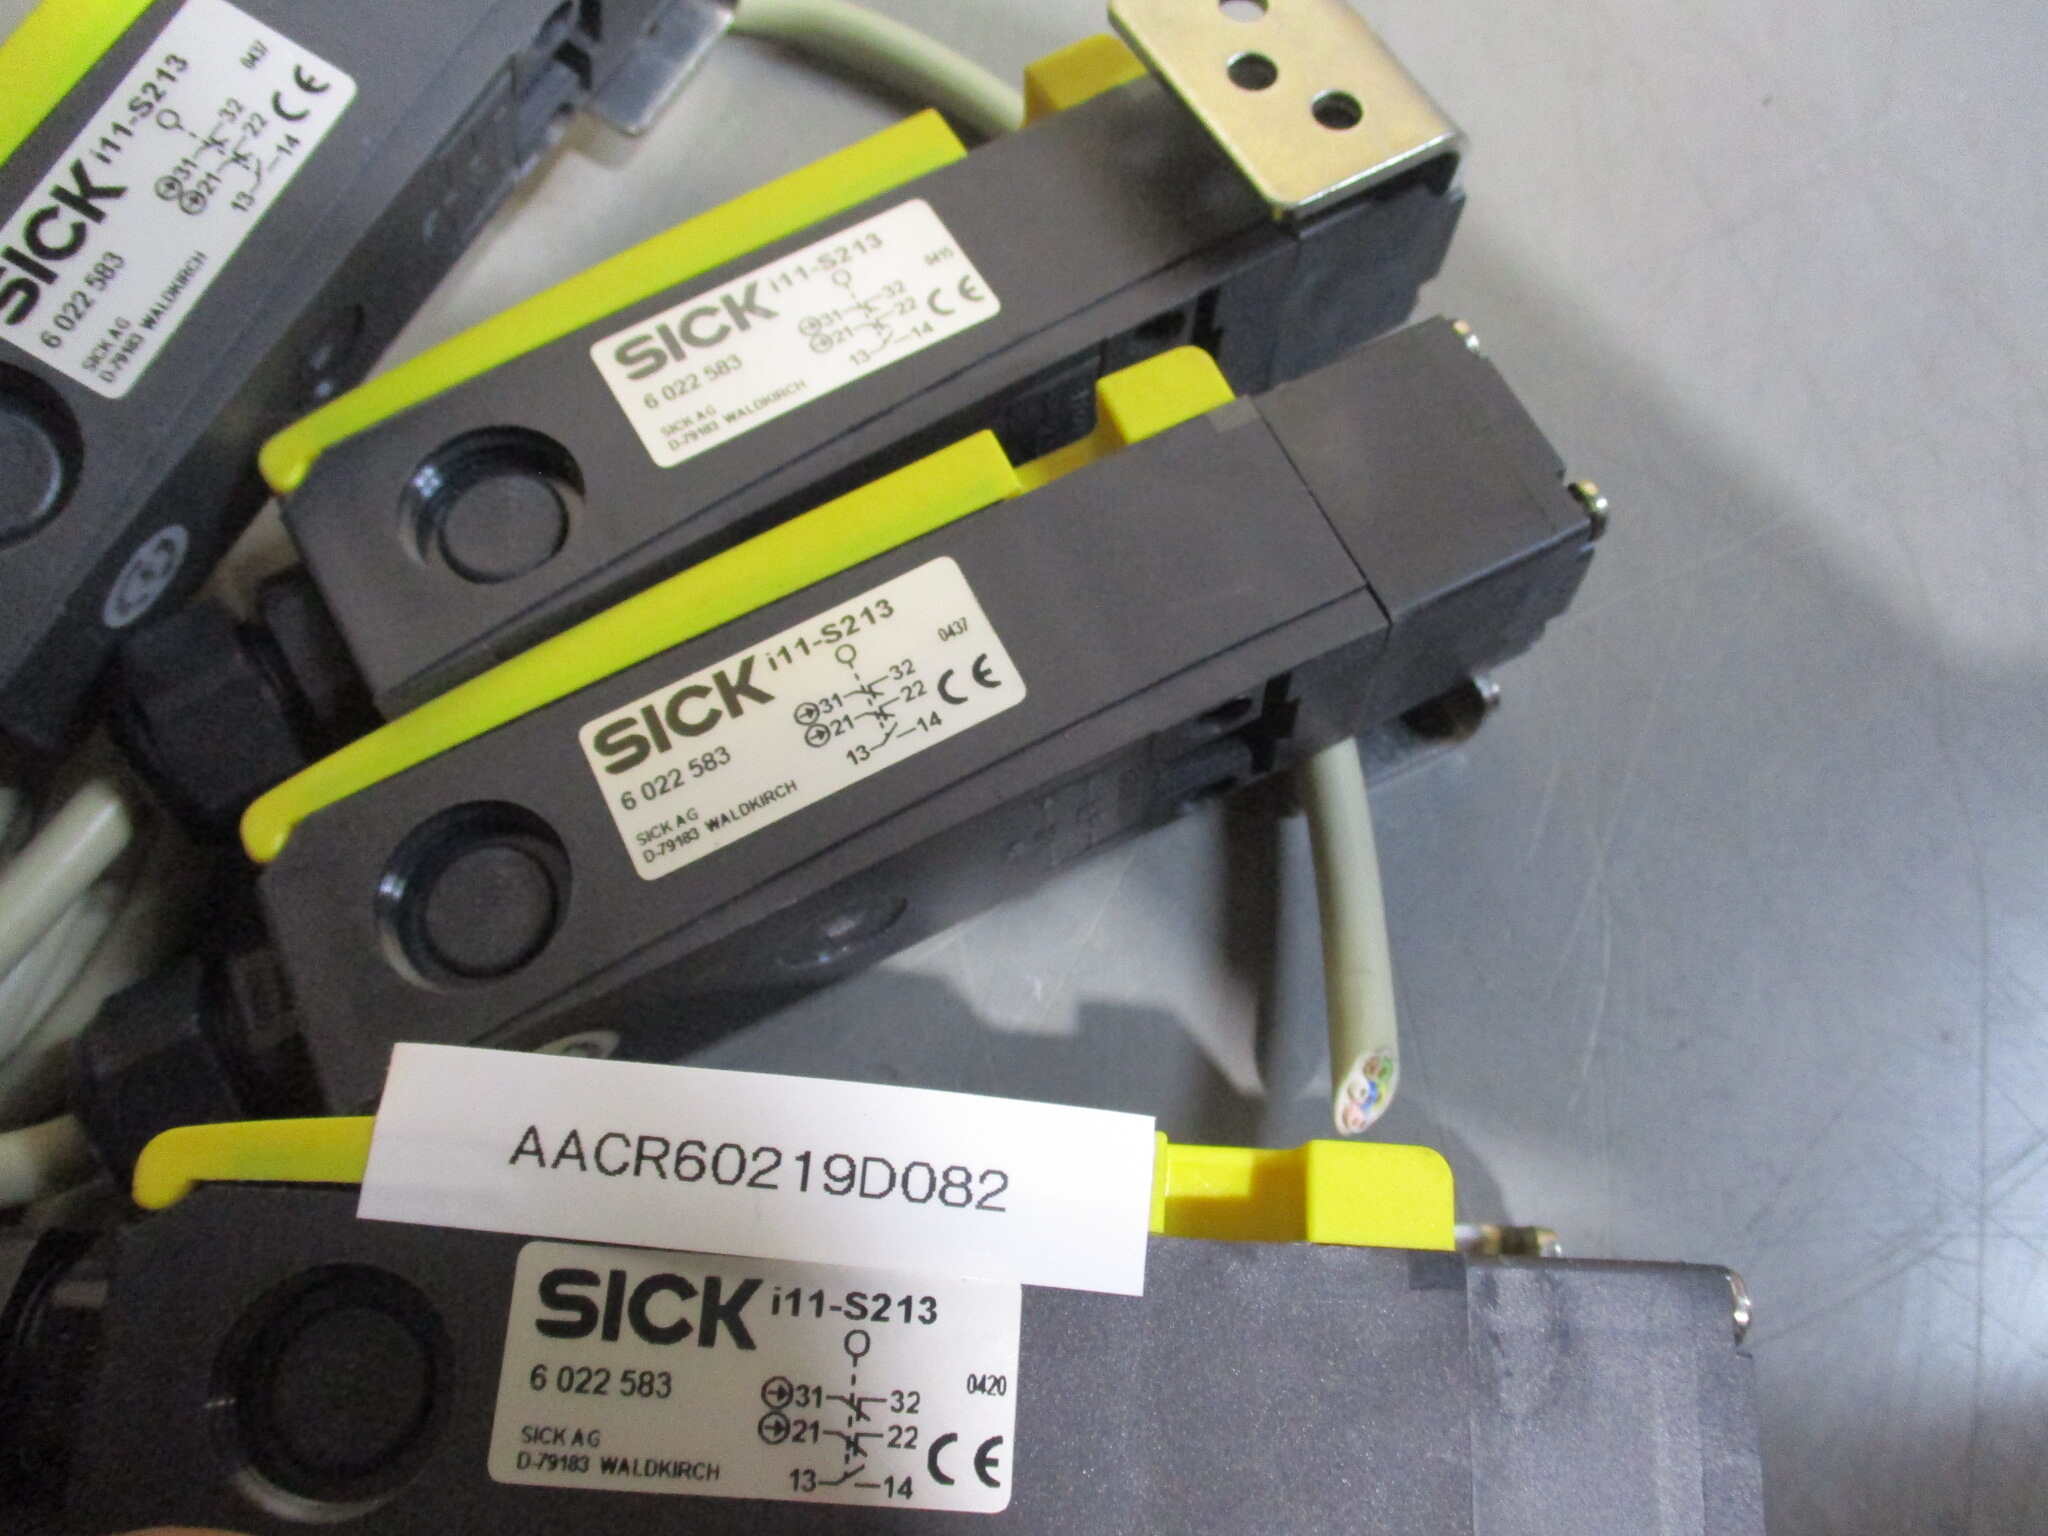  used SICK SWITCH SAFETY I11-S213 4 set (AACR60219D082)